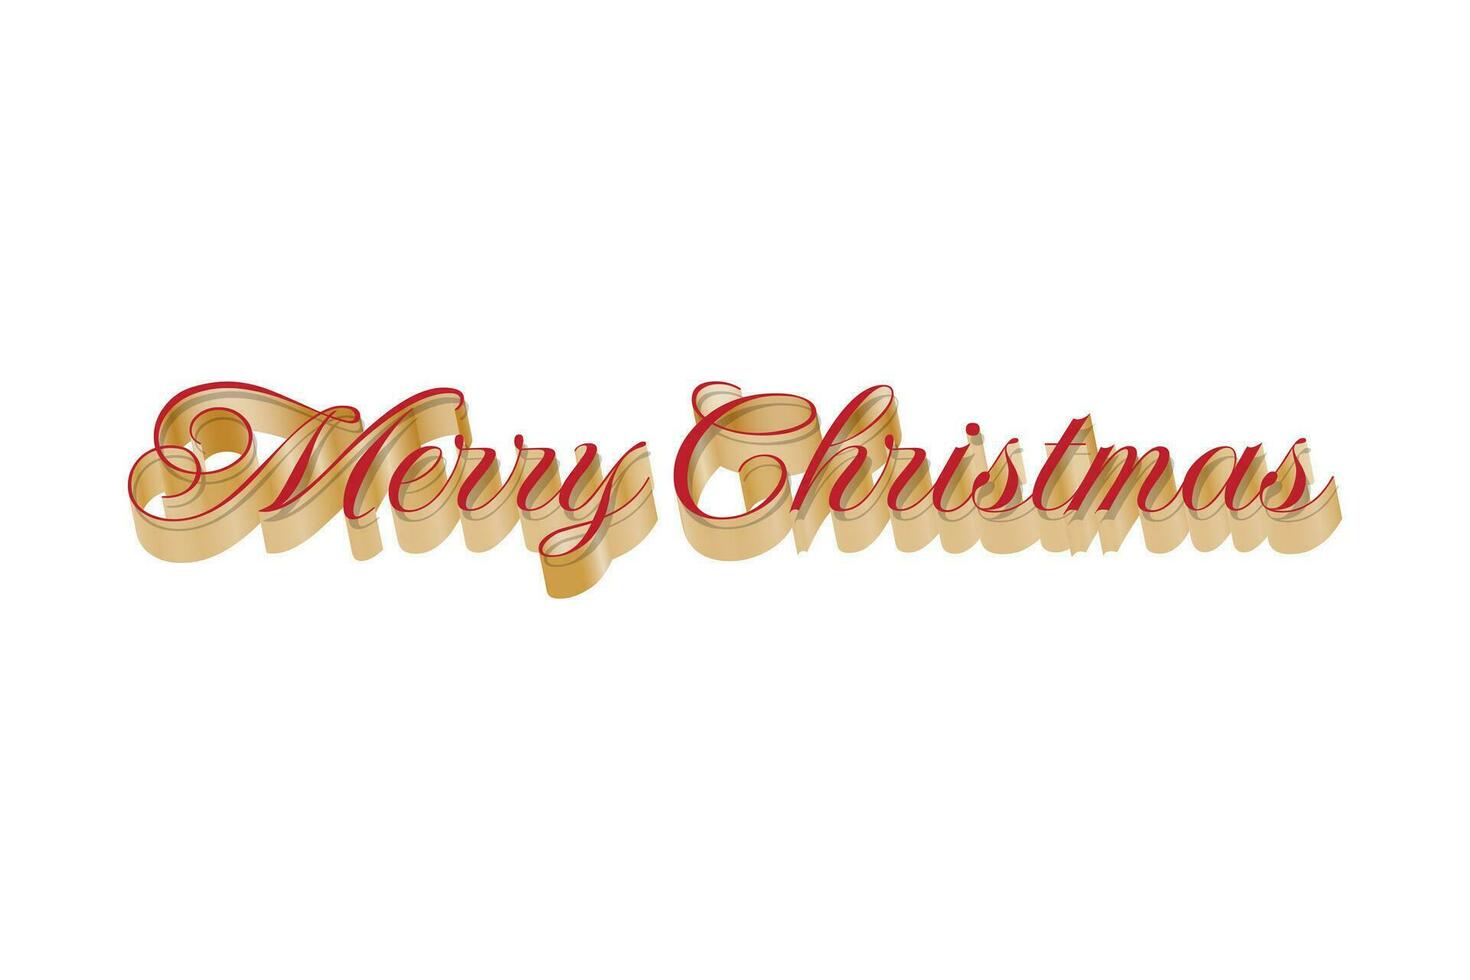 Merry Christmas 3d Gold and Red Color on White Background vector